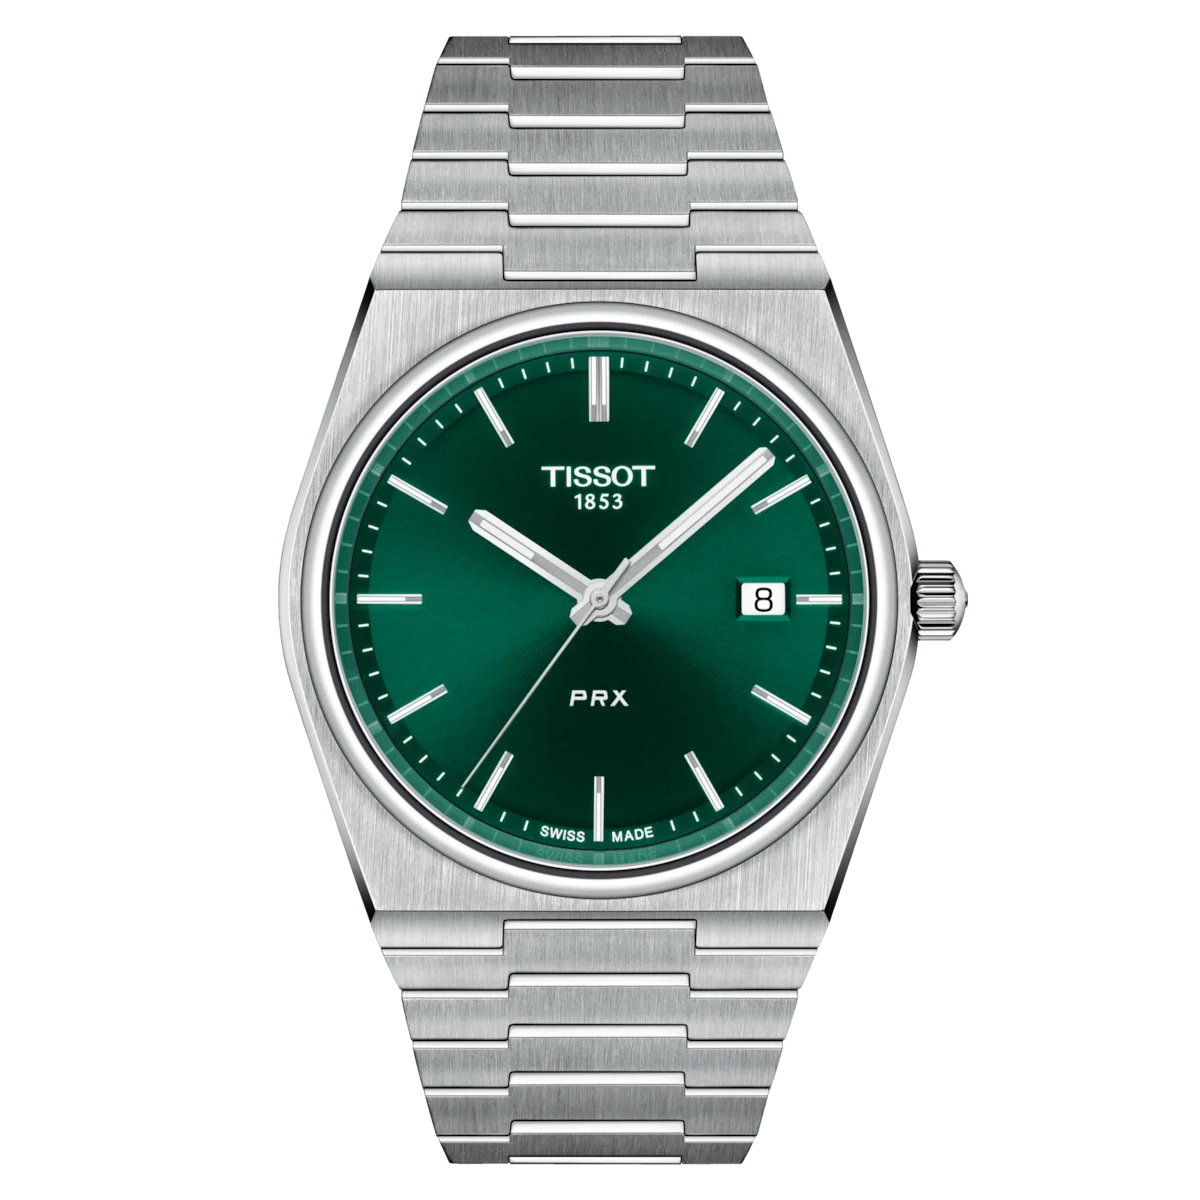 Tissot PRX Green PVD Dial in stainless steel case, date at 3 o'clock quartz watch on stainless steel bracelet. T137.410.11.091.00 - Front Image